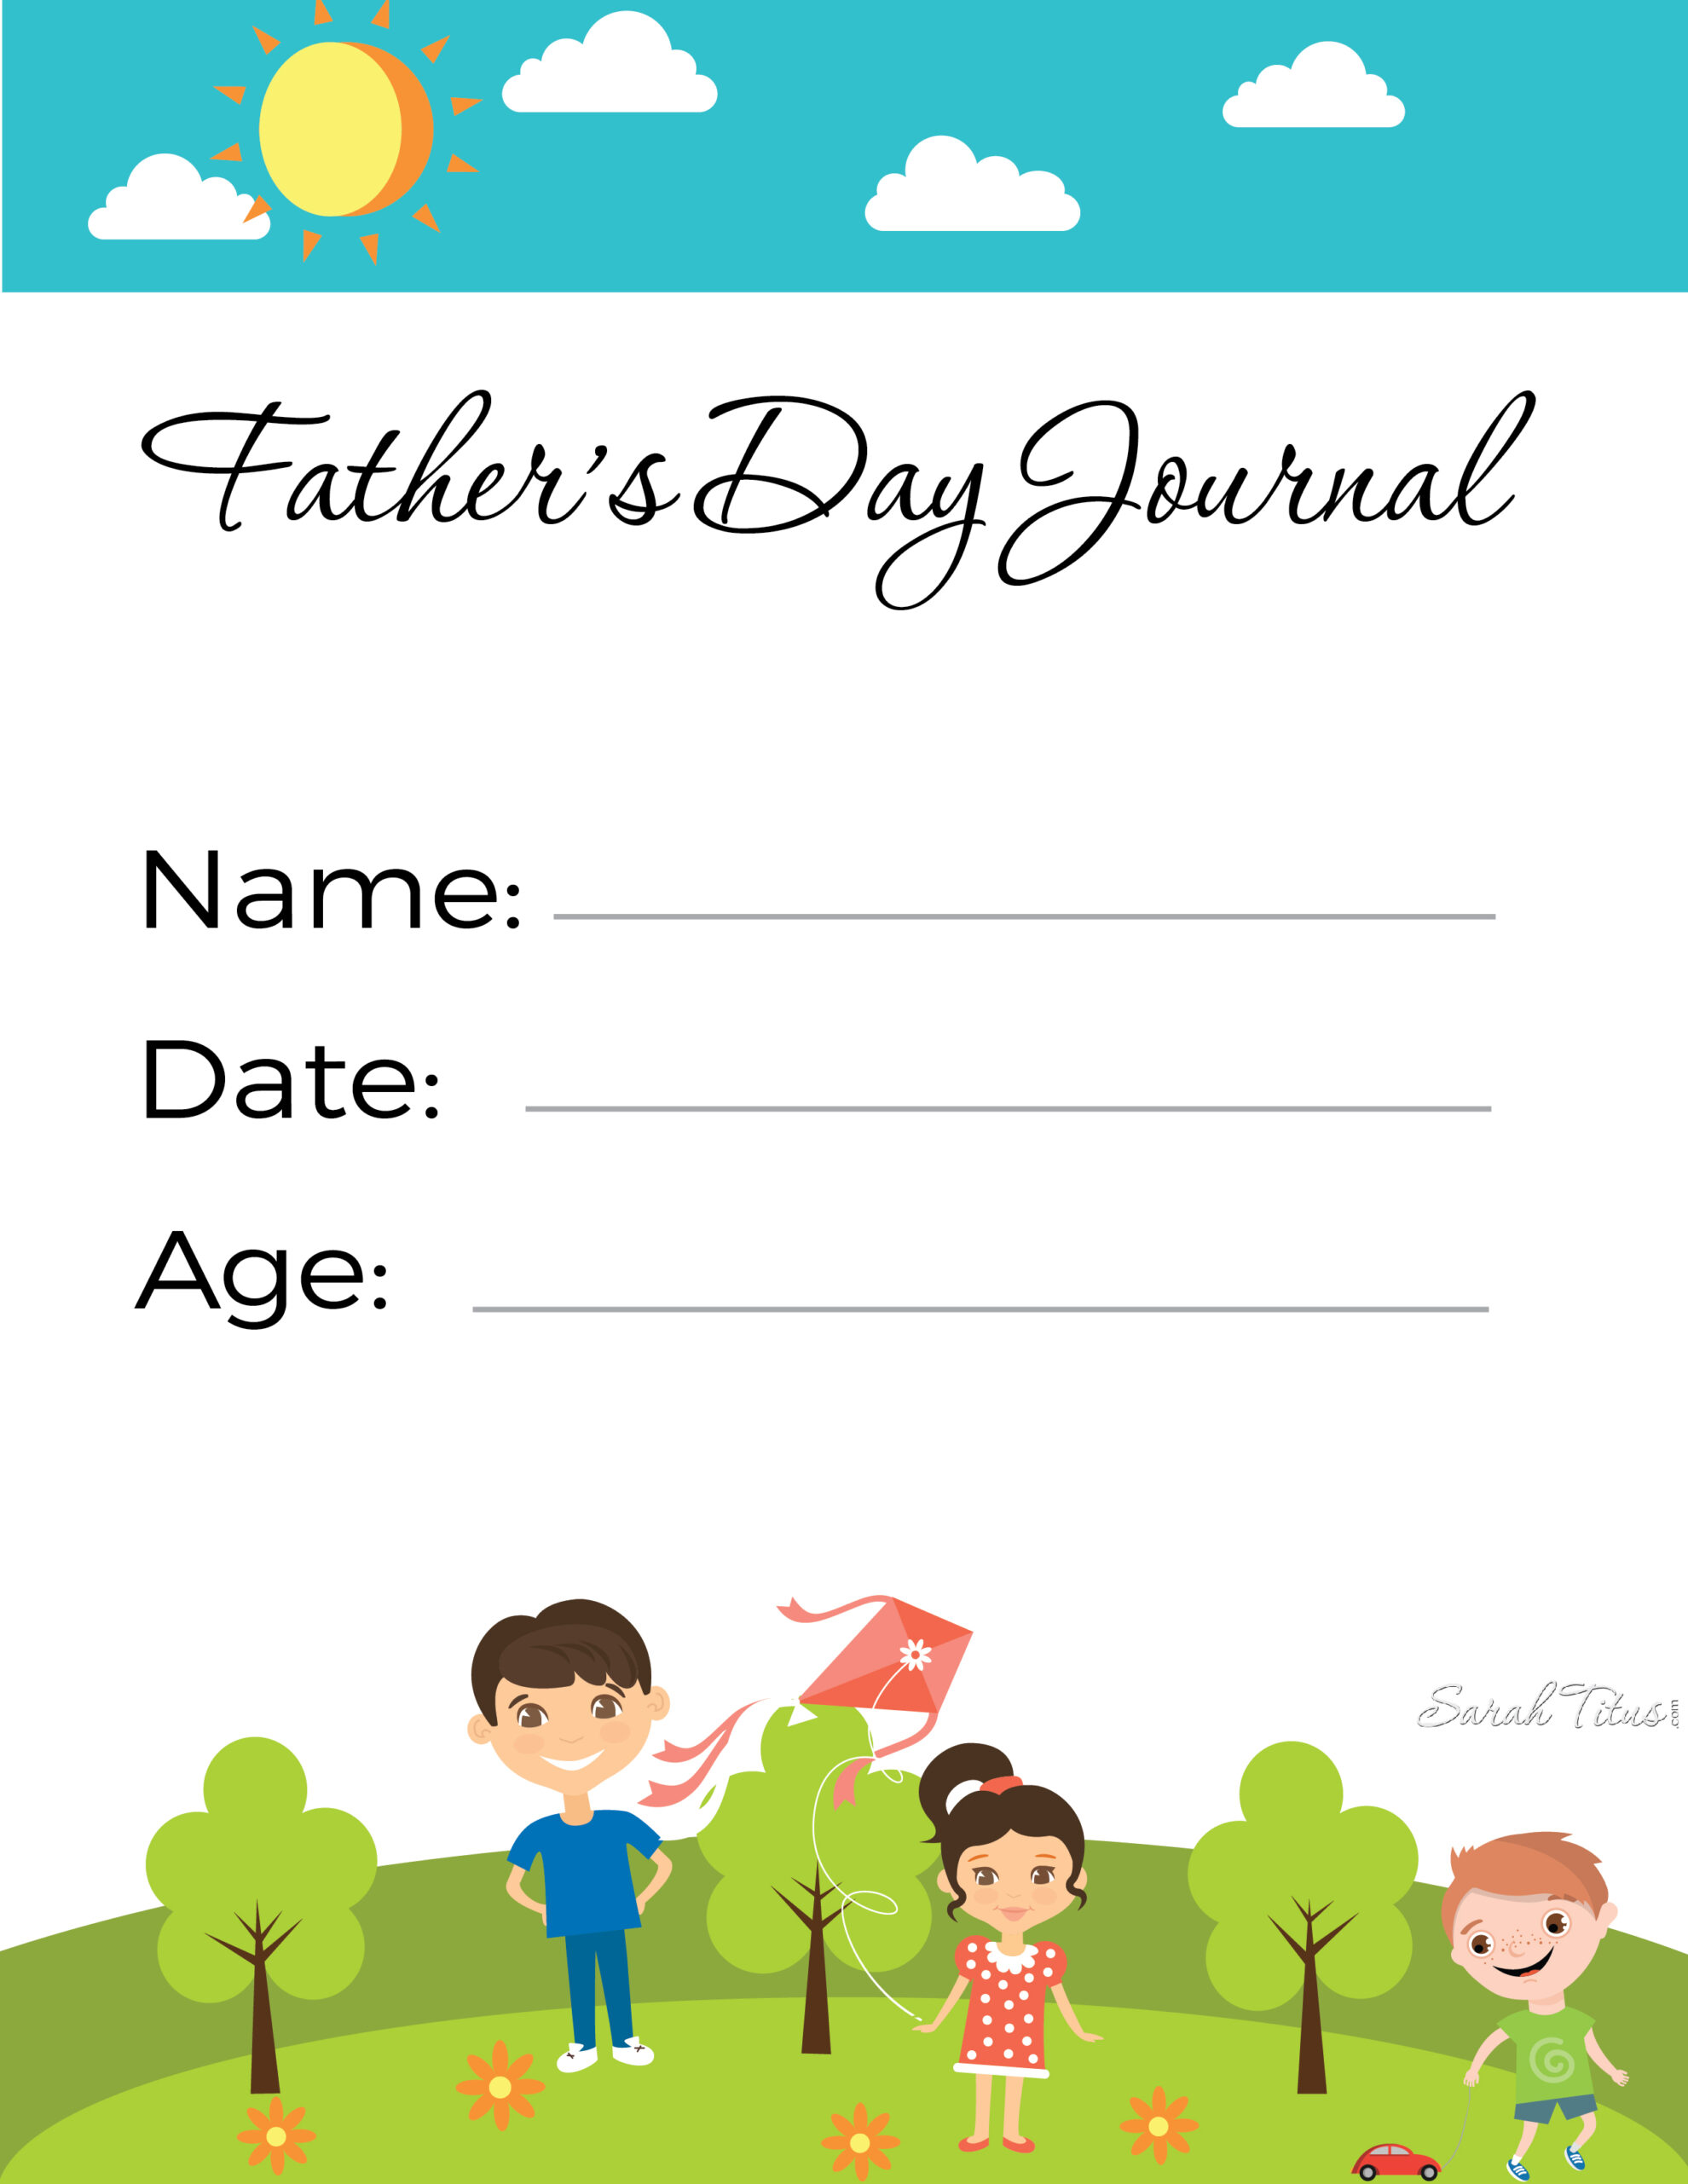 Colorful Father's Day Journal printable page with name, date and age